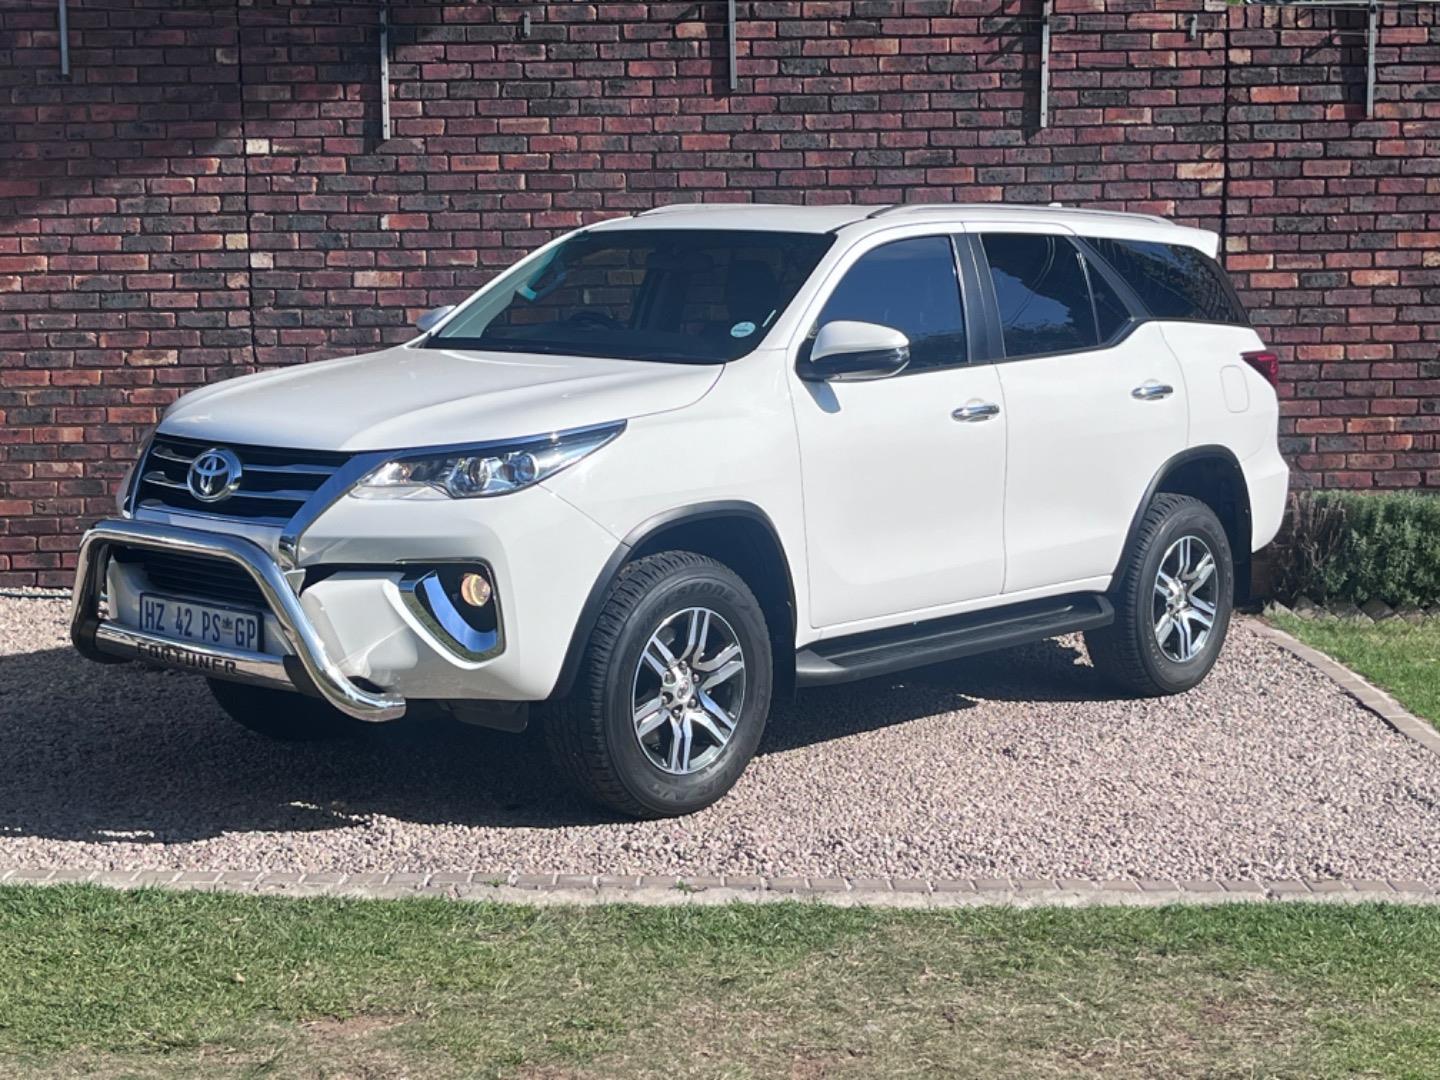 2018 Toyota Fortuner 2.4GD-6 Auto For Sale